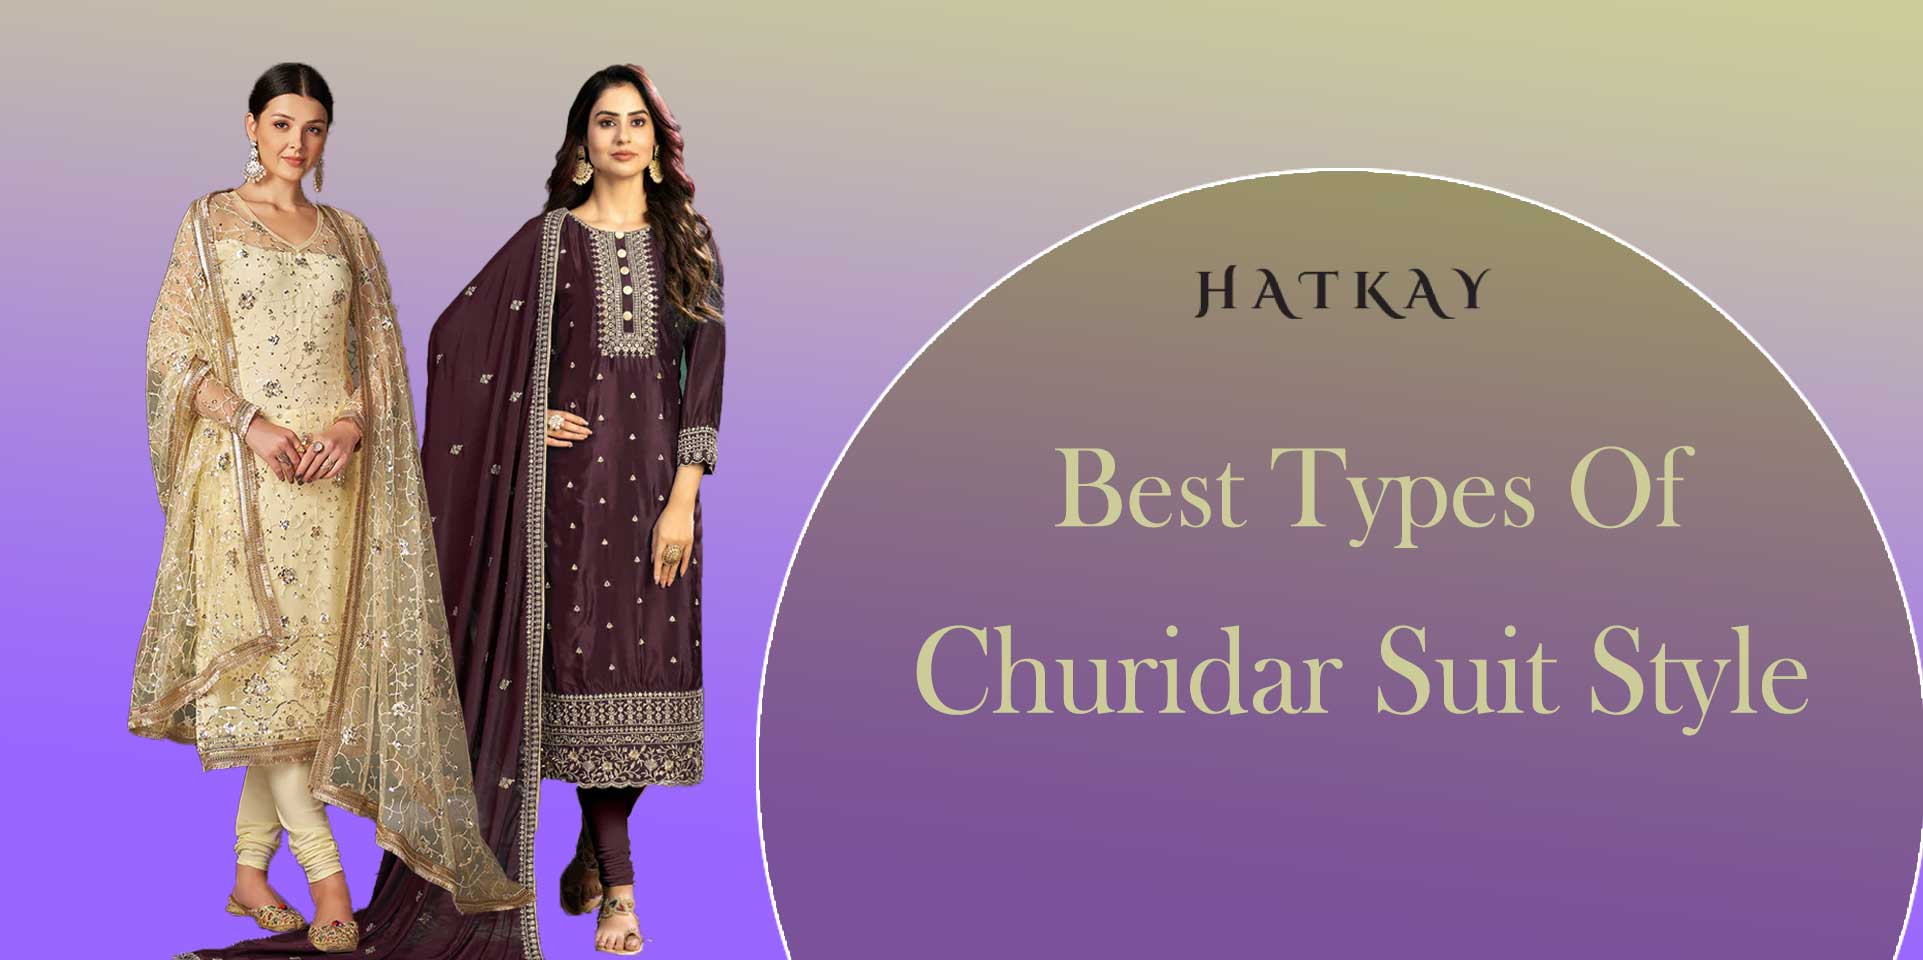 How Many Types of Churidar Suit Styles are There? Which is the Best Type of Churidar Suit Style?